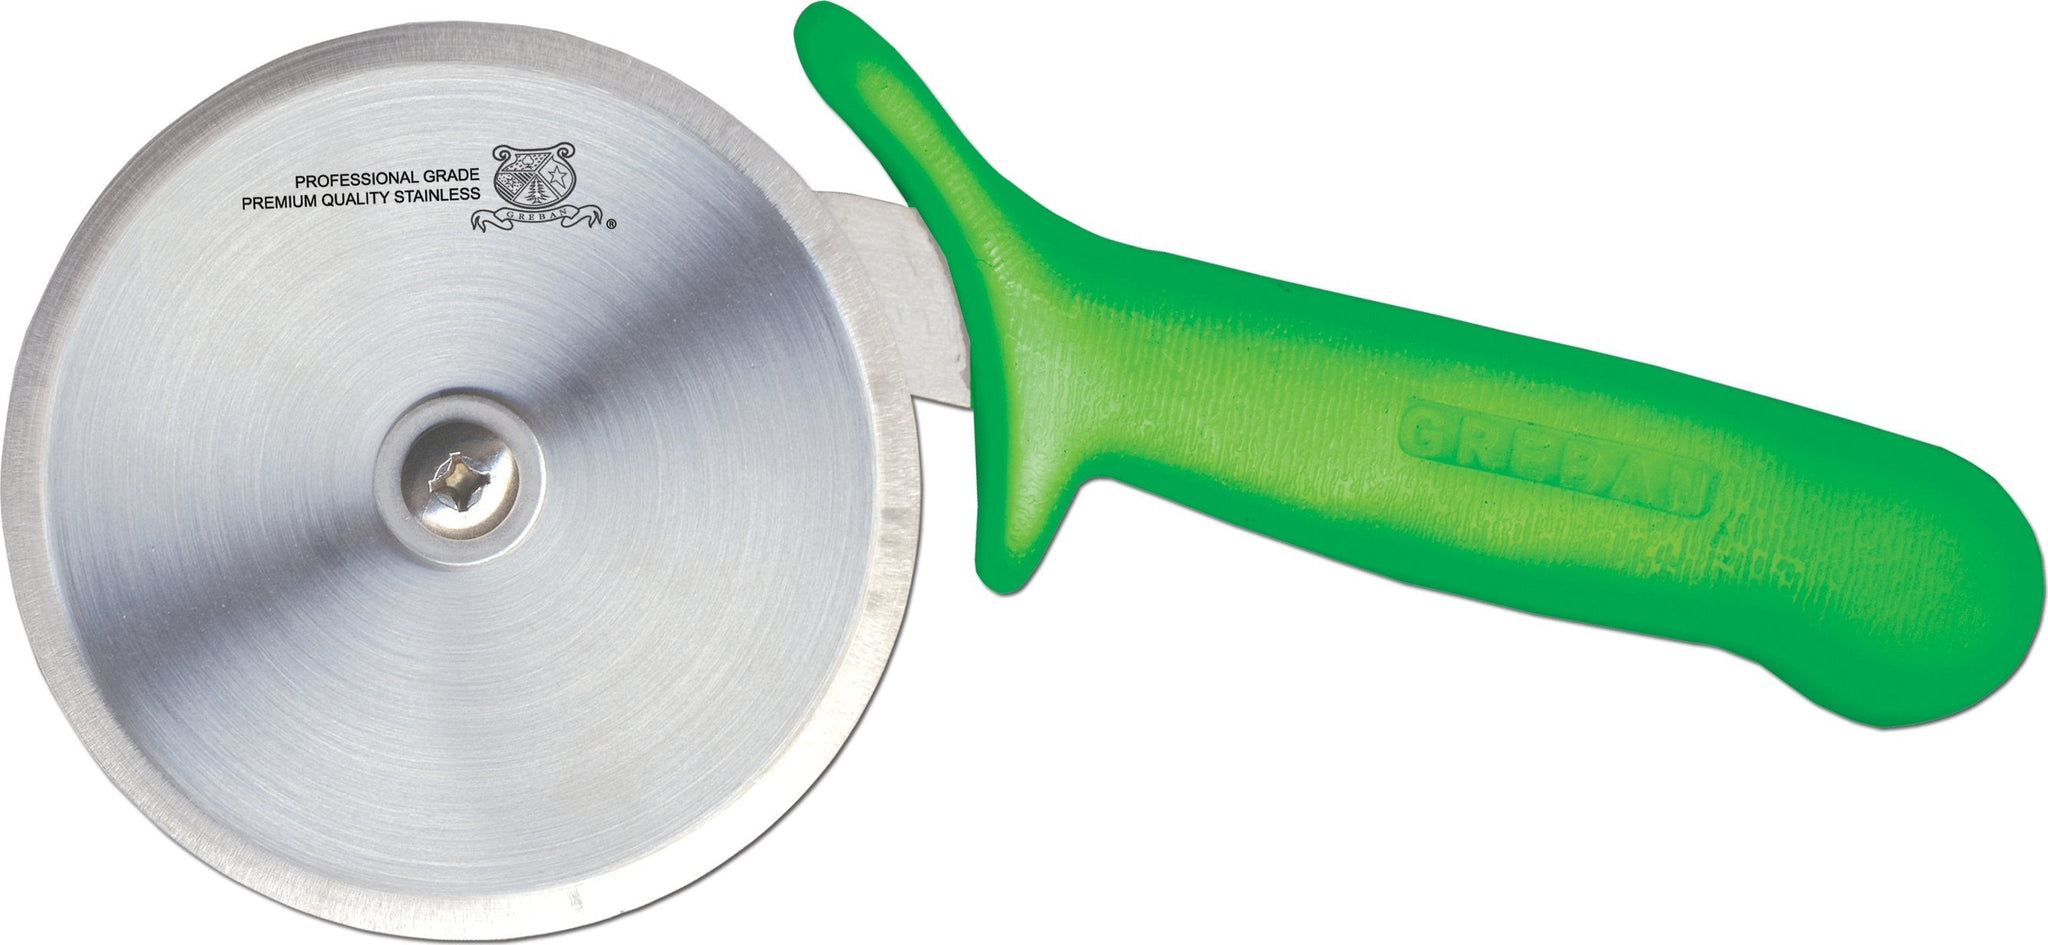 Omcan - 4” R-Style Pizza Cutter with Green Handle, 10/cs - 18841